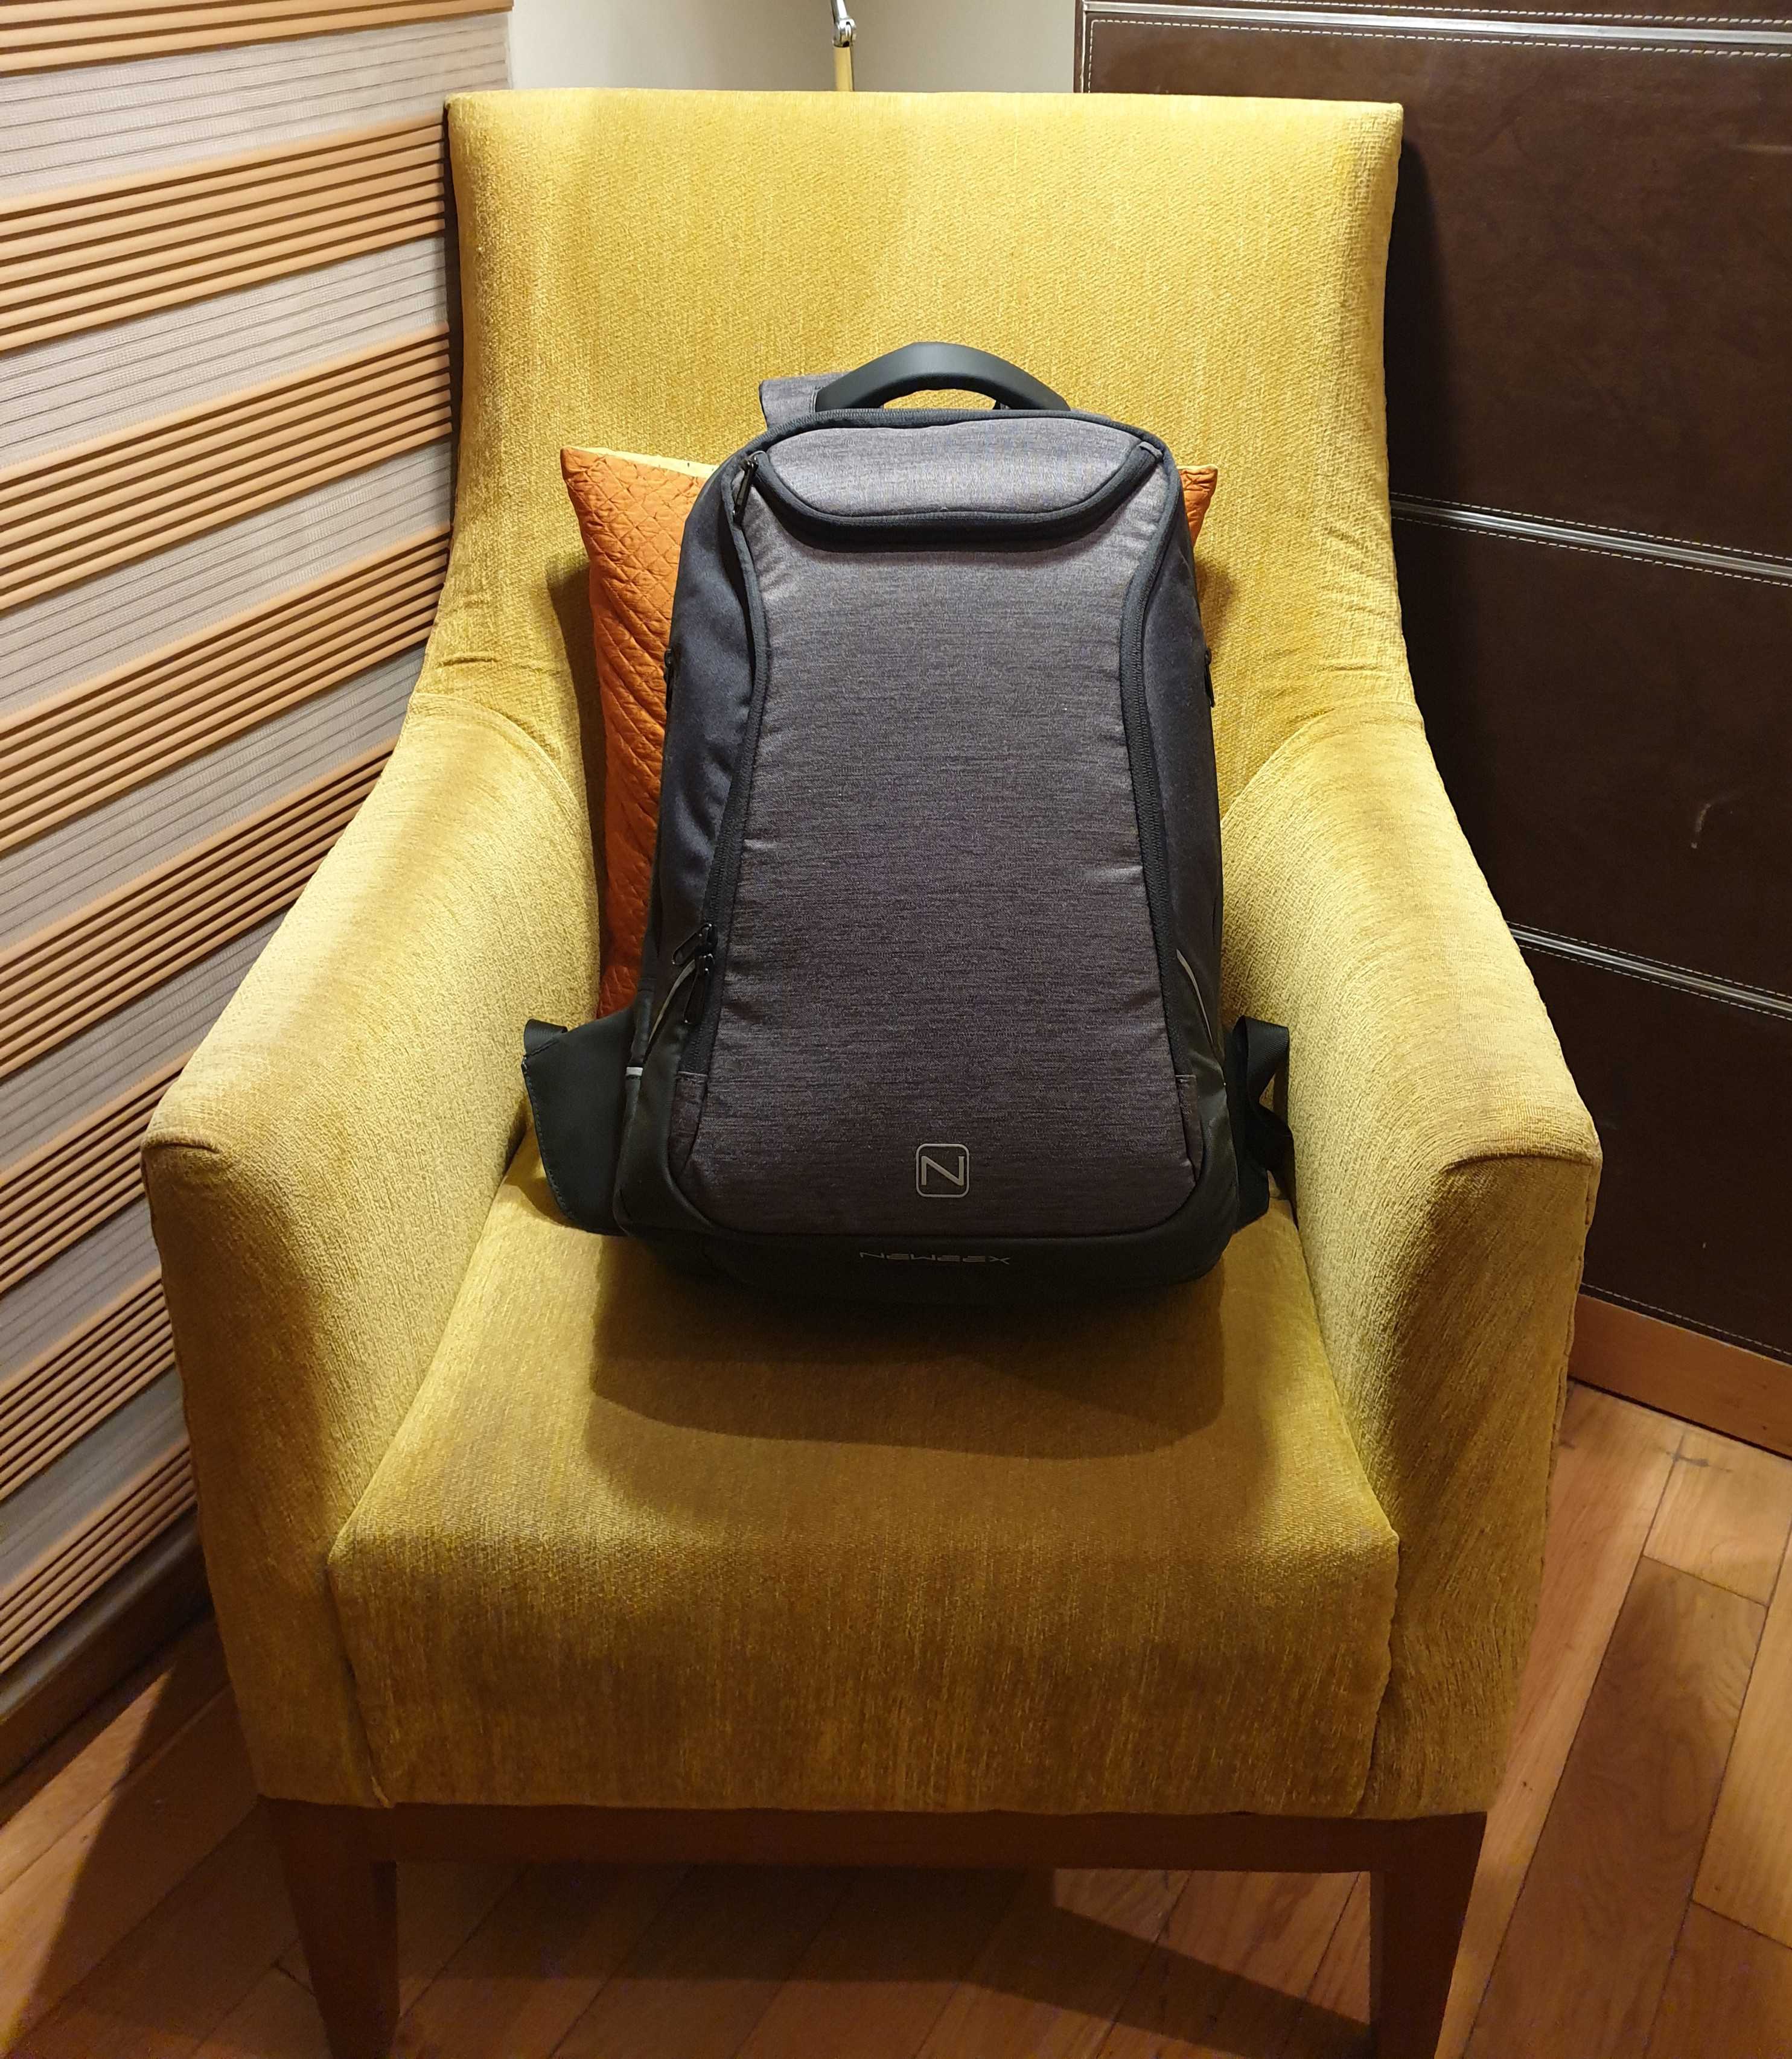 Neweex Backpack Review - Now you can Travel with Style! - 9